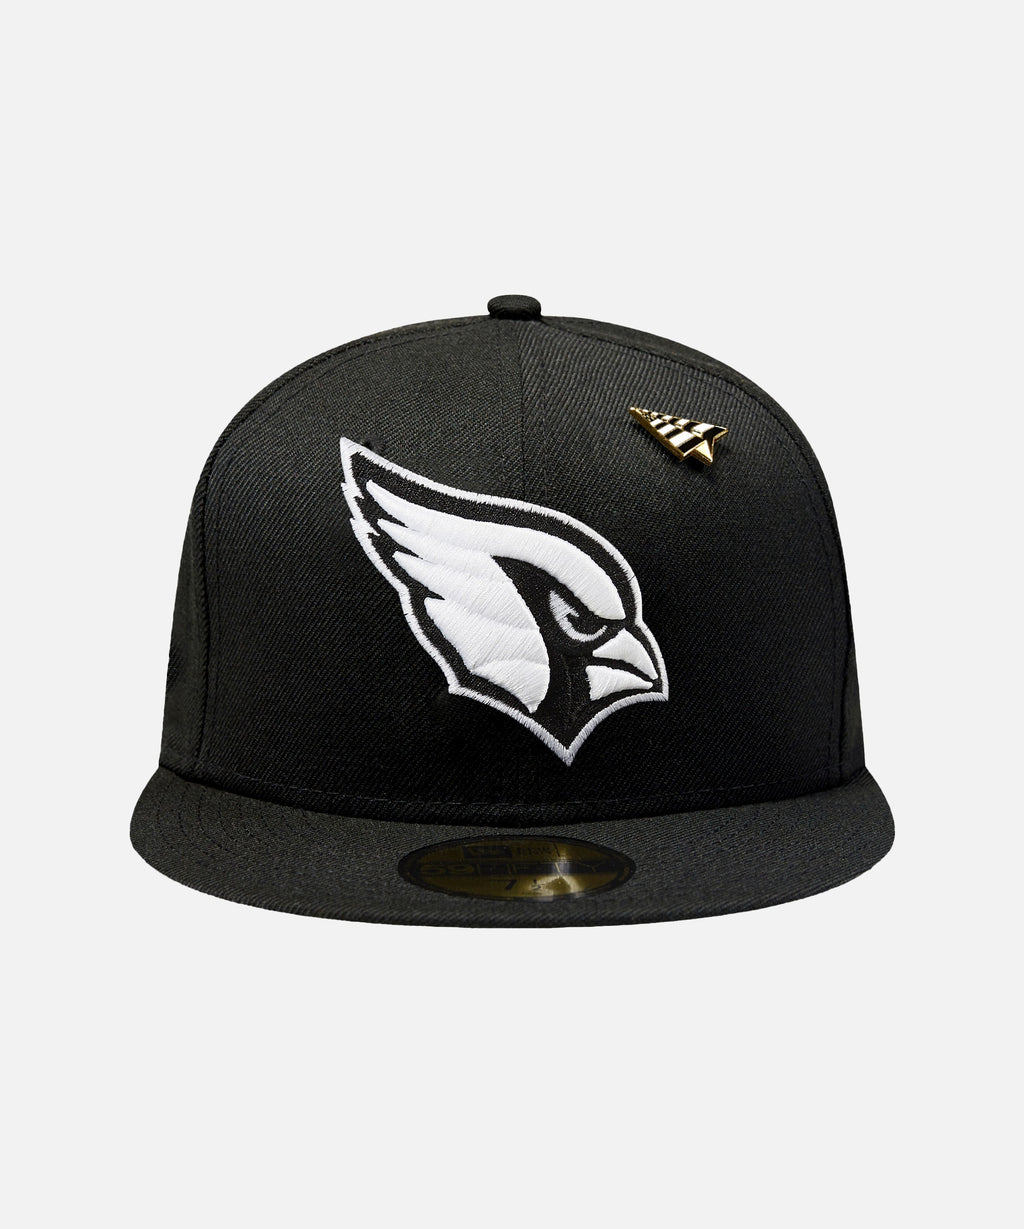 arizona cardinals fitted